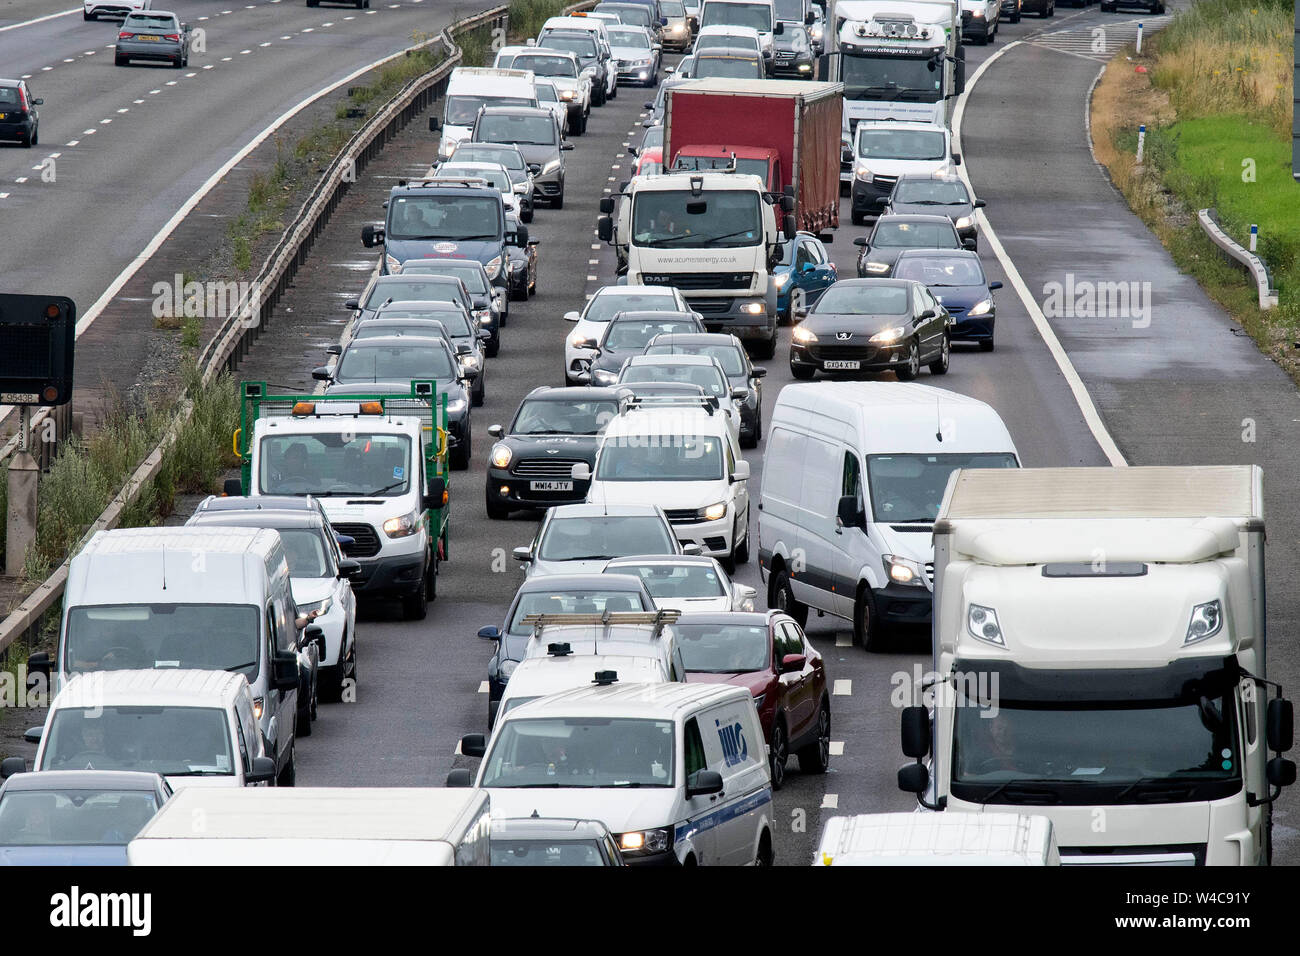 Traffic stopped on the M40 Motorway nr Warwick as people hit the road for the summer holidays on the last day of the school year 19.7.19 Stock Photo